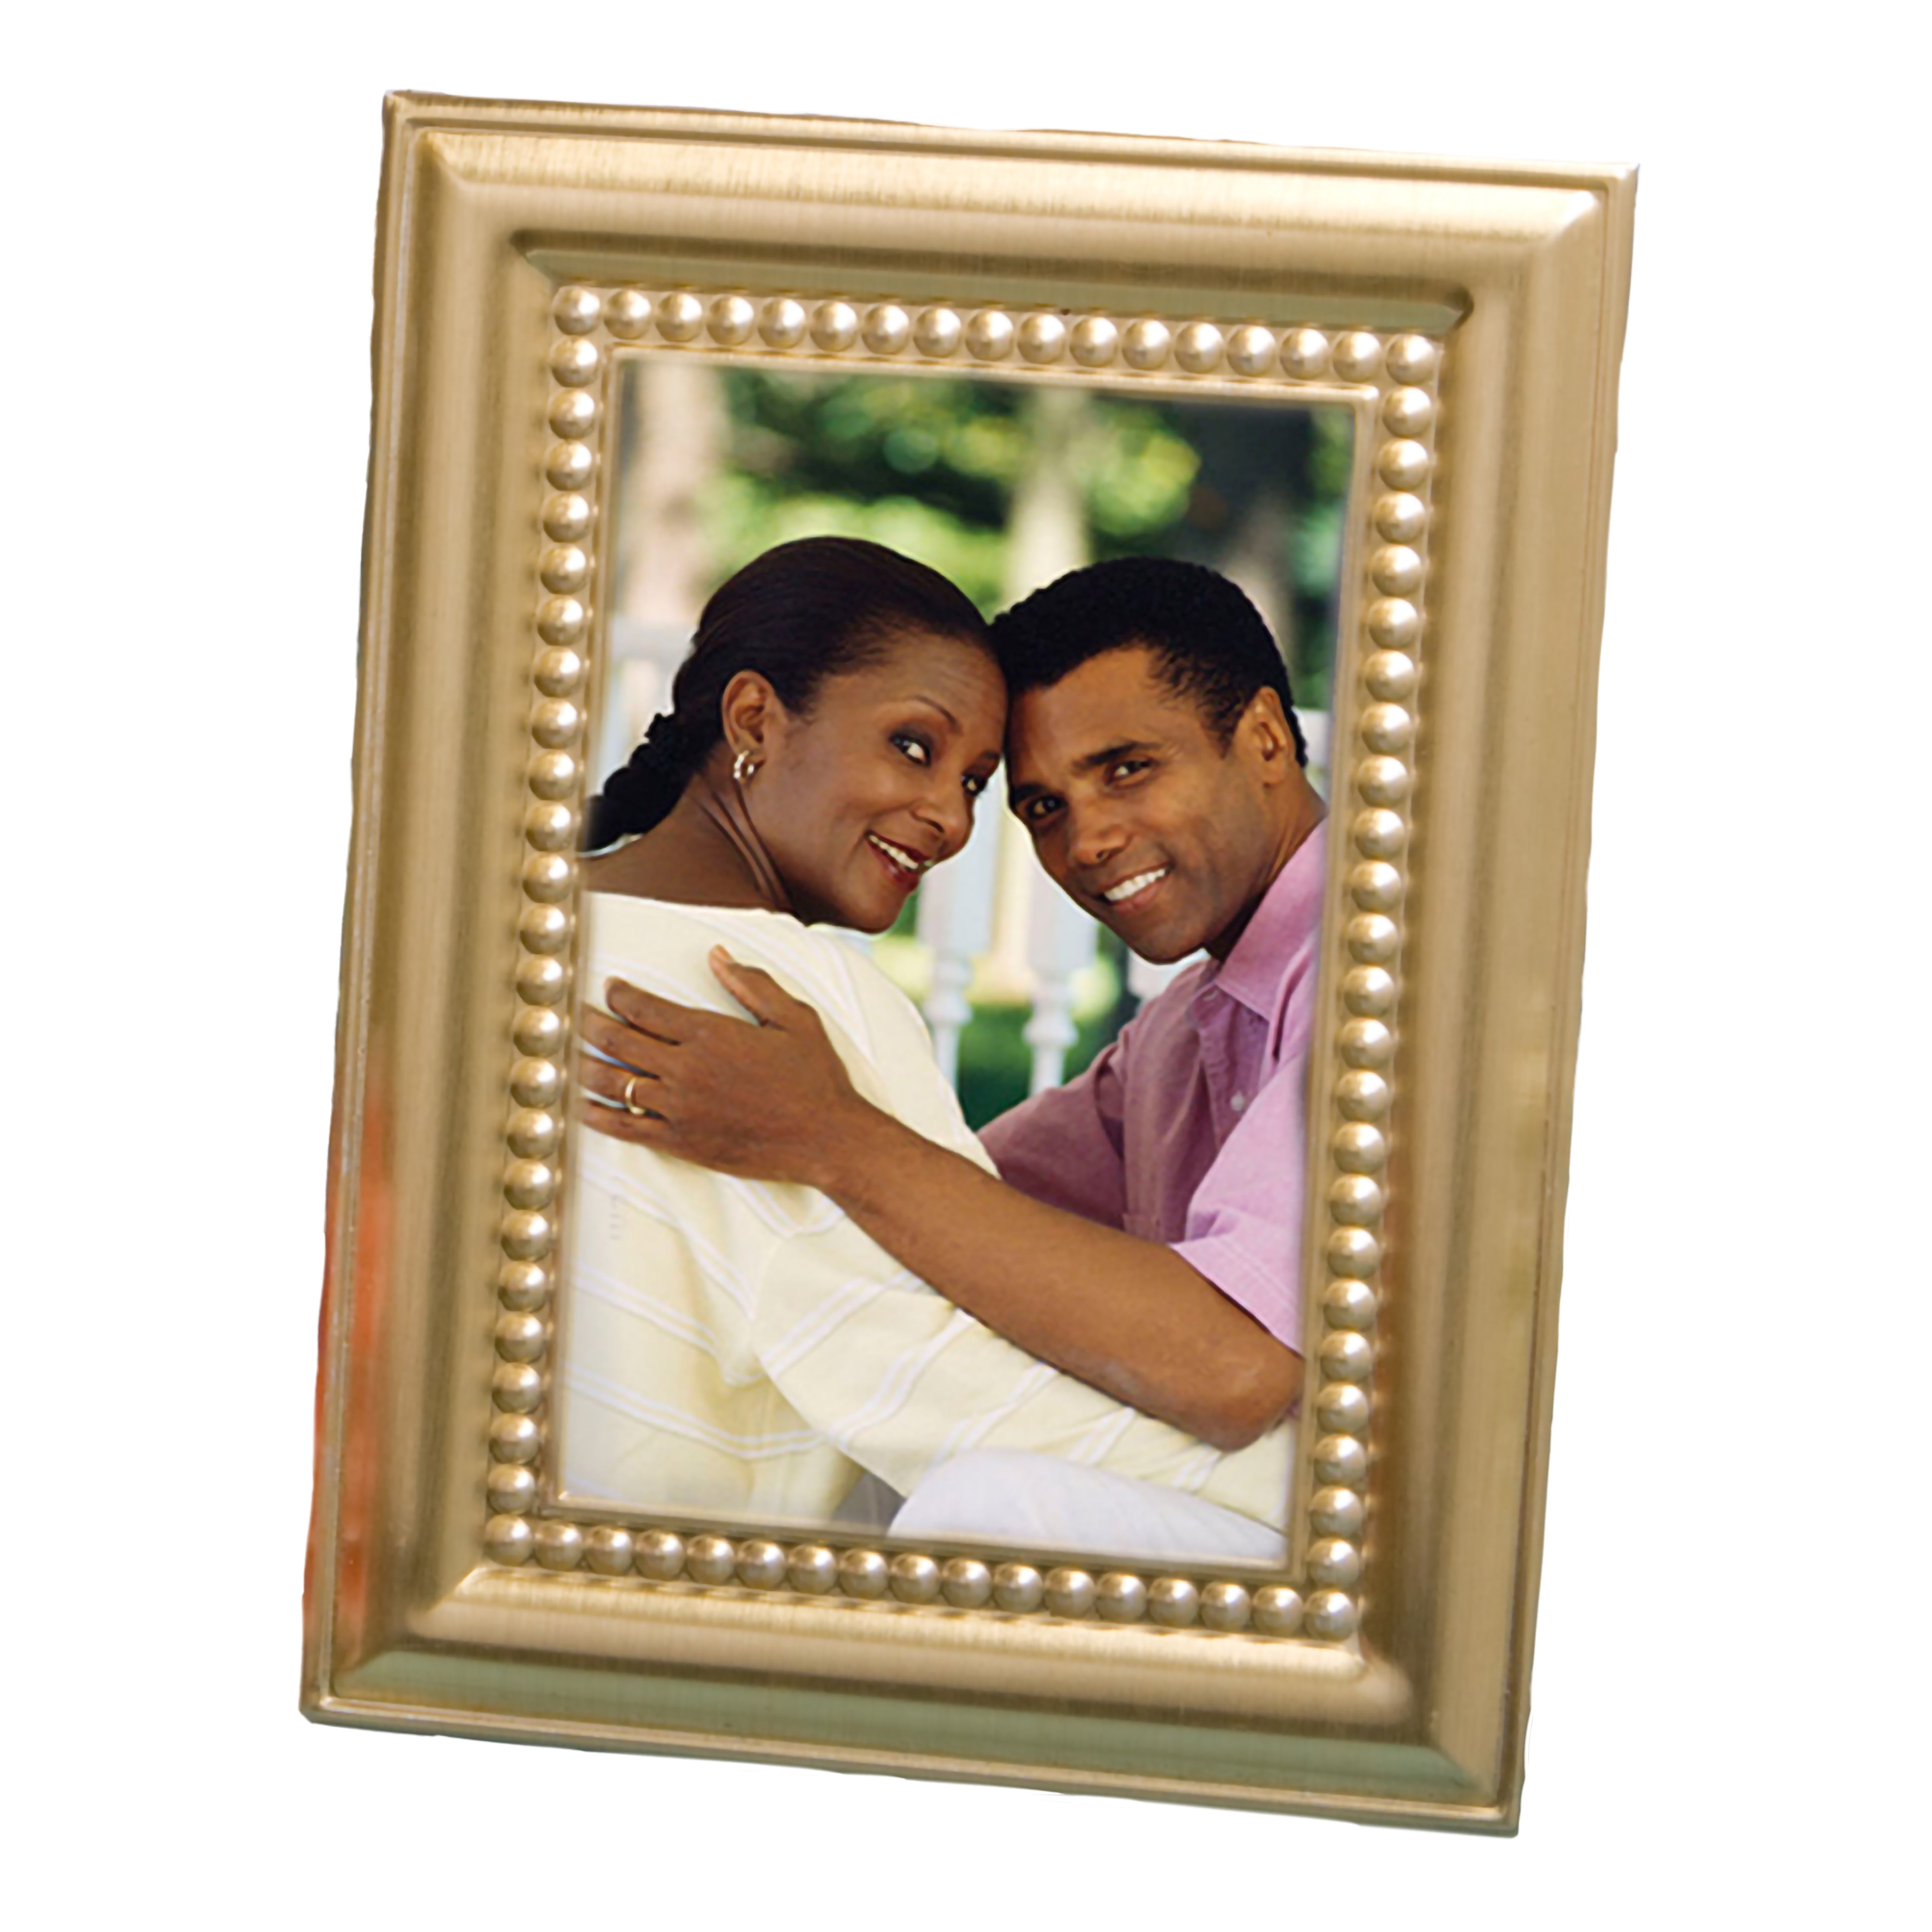 3.75" Tall x 3" Wide Oval Black Resin Easel Back Table Top Photo Frame 